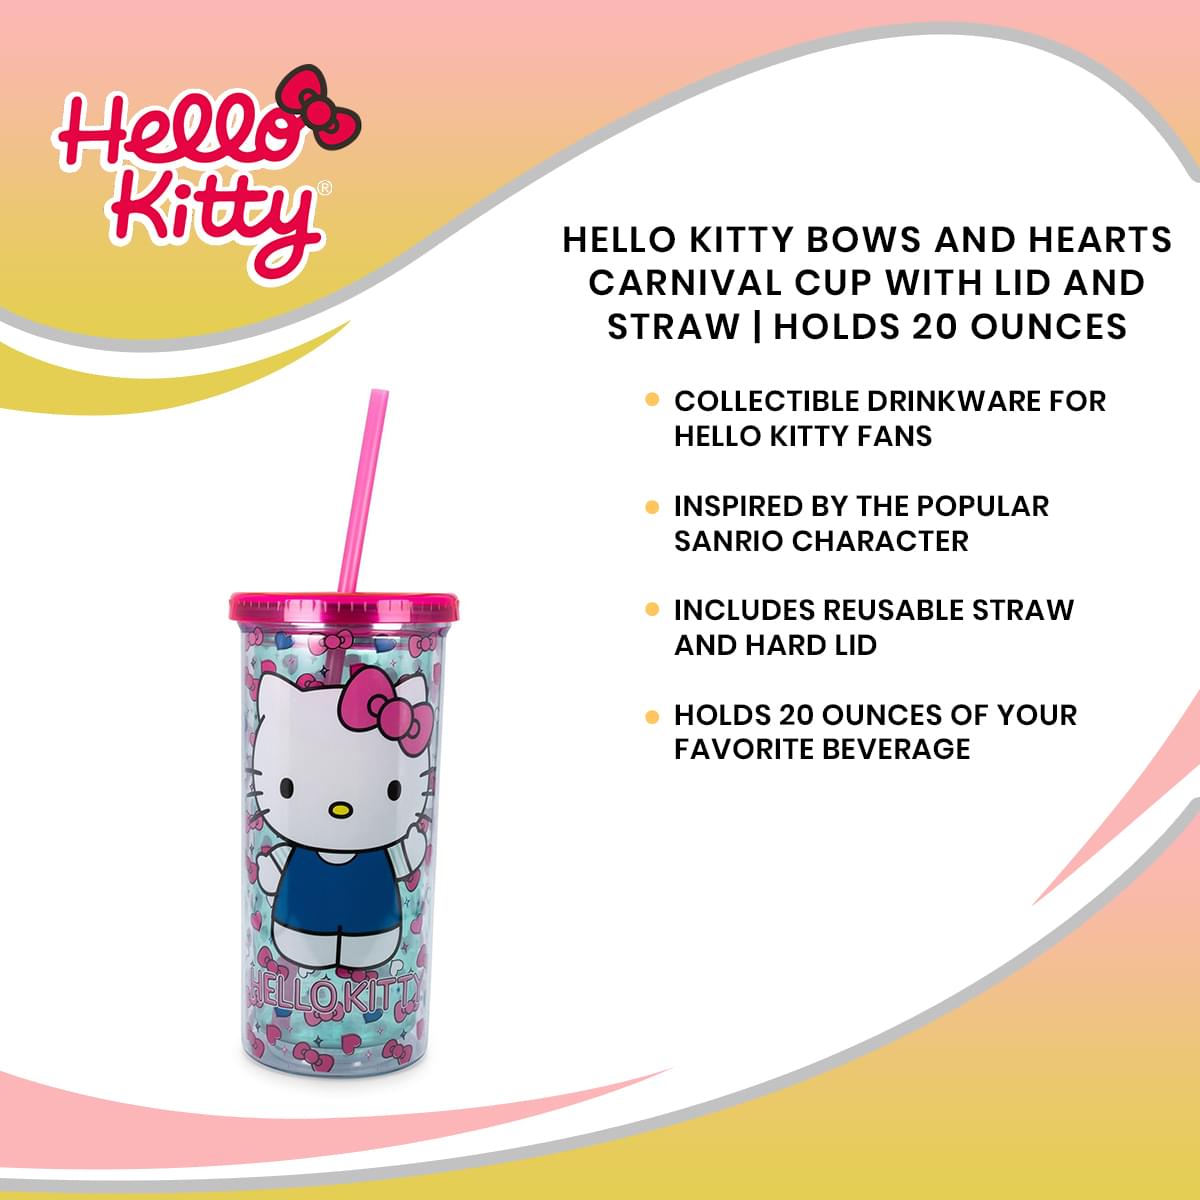 Hello Kitty Bows and Hearts Carnival Cup with Lid and Straw Holds 20 Ounces